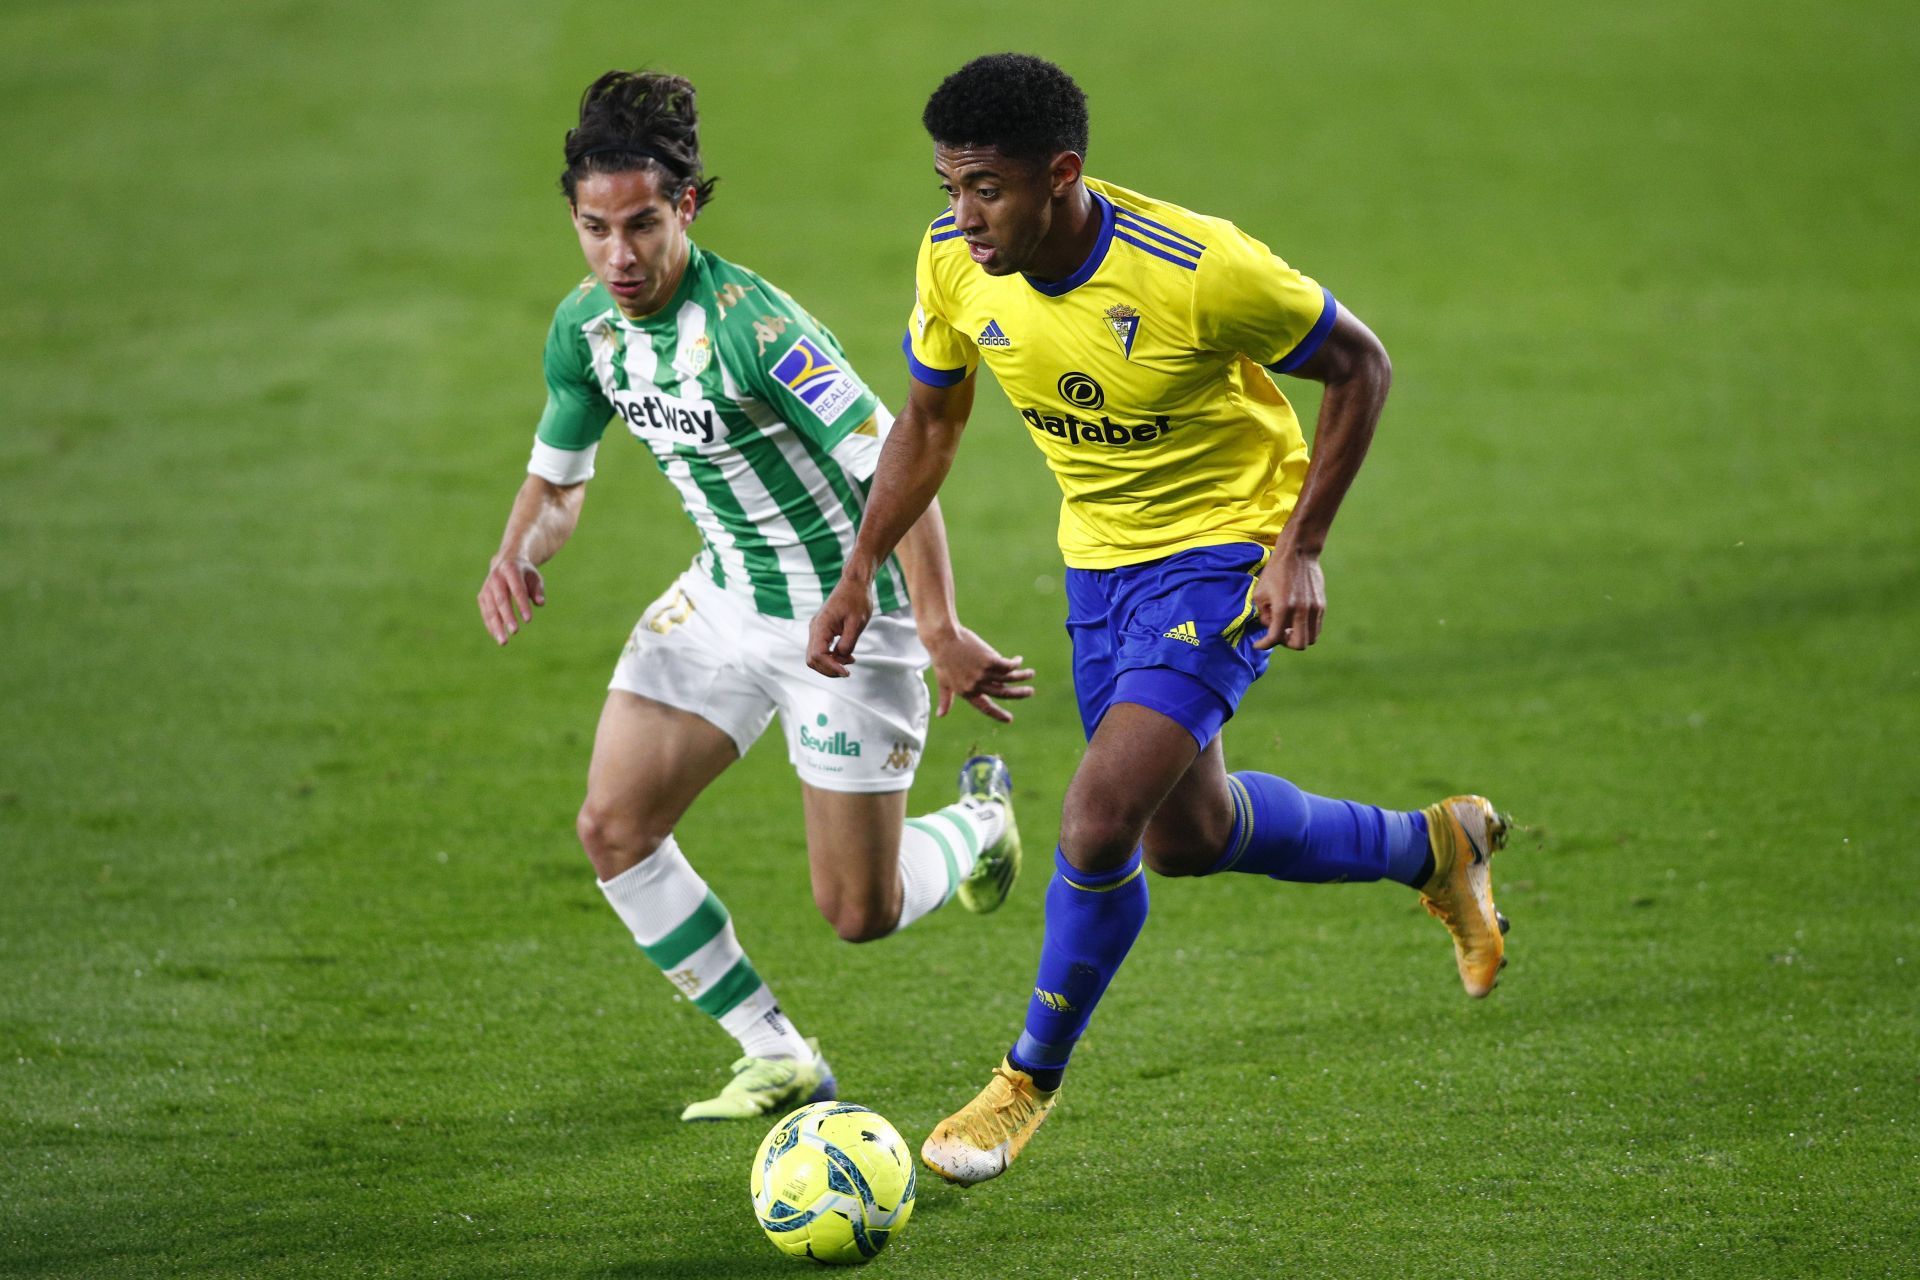 Cadiz and Real Betis square off on Saturday.